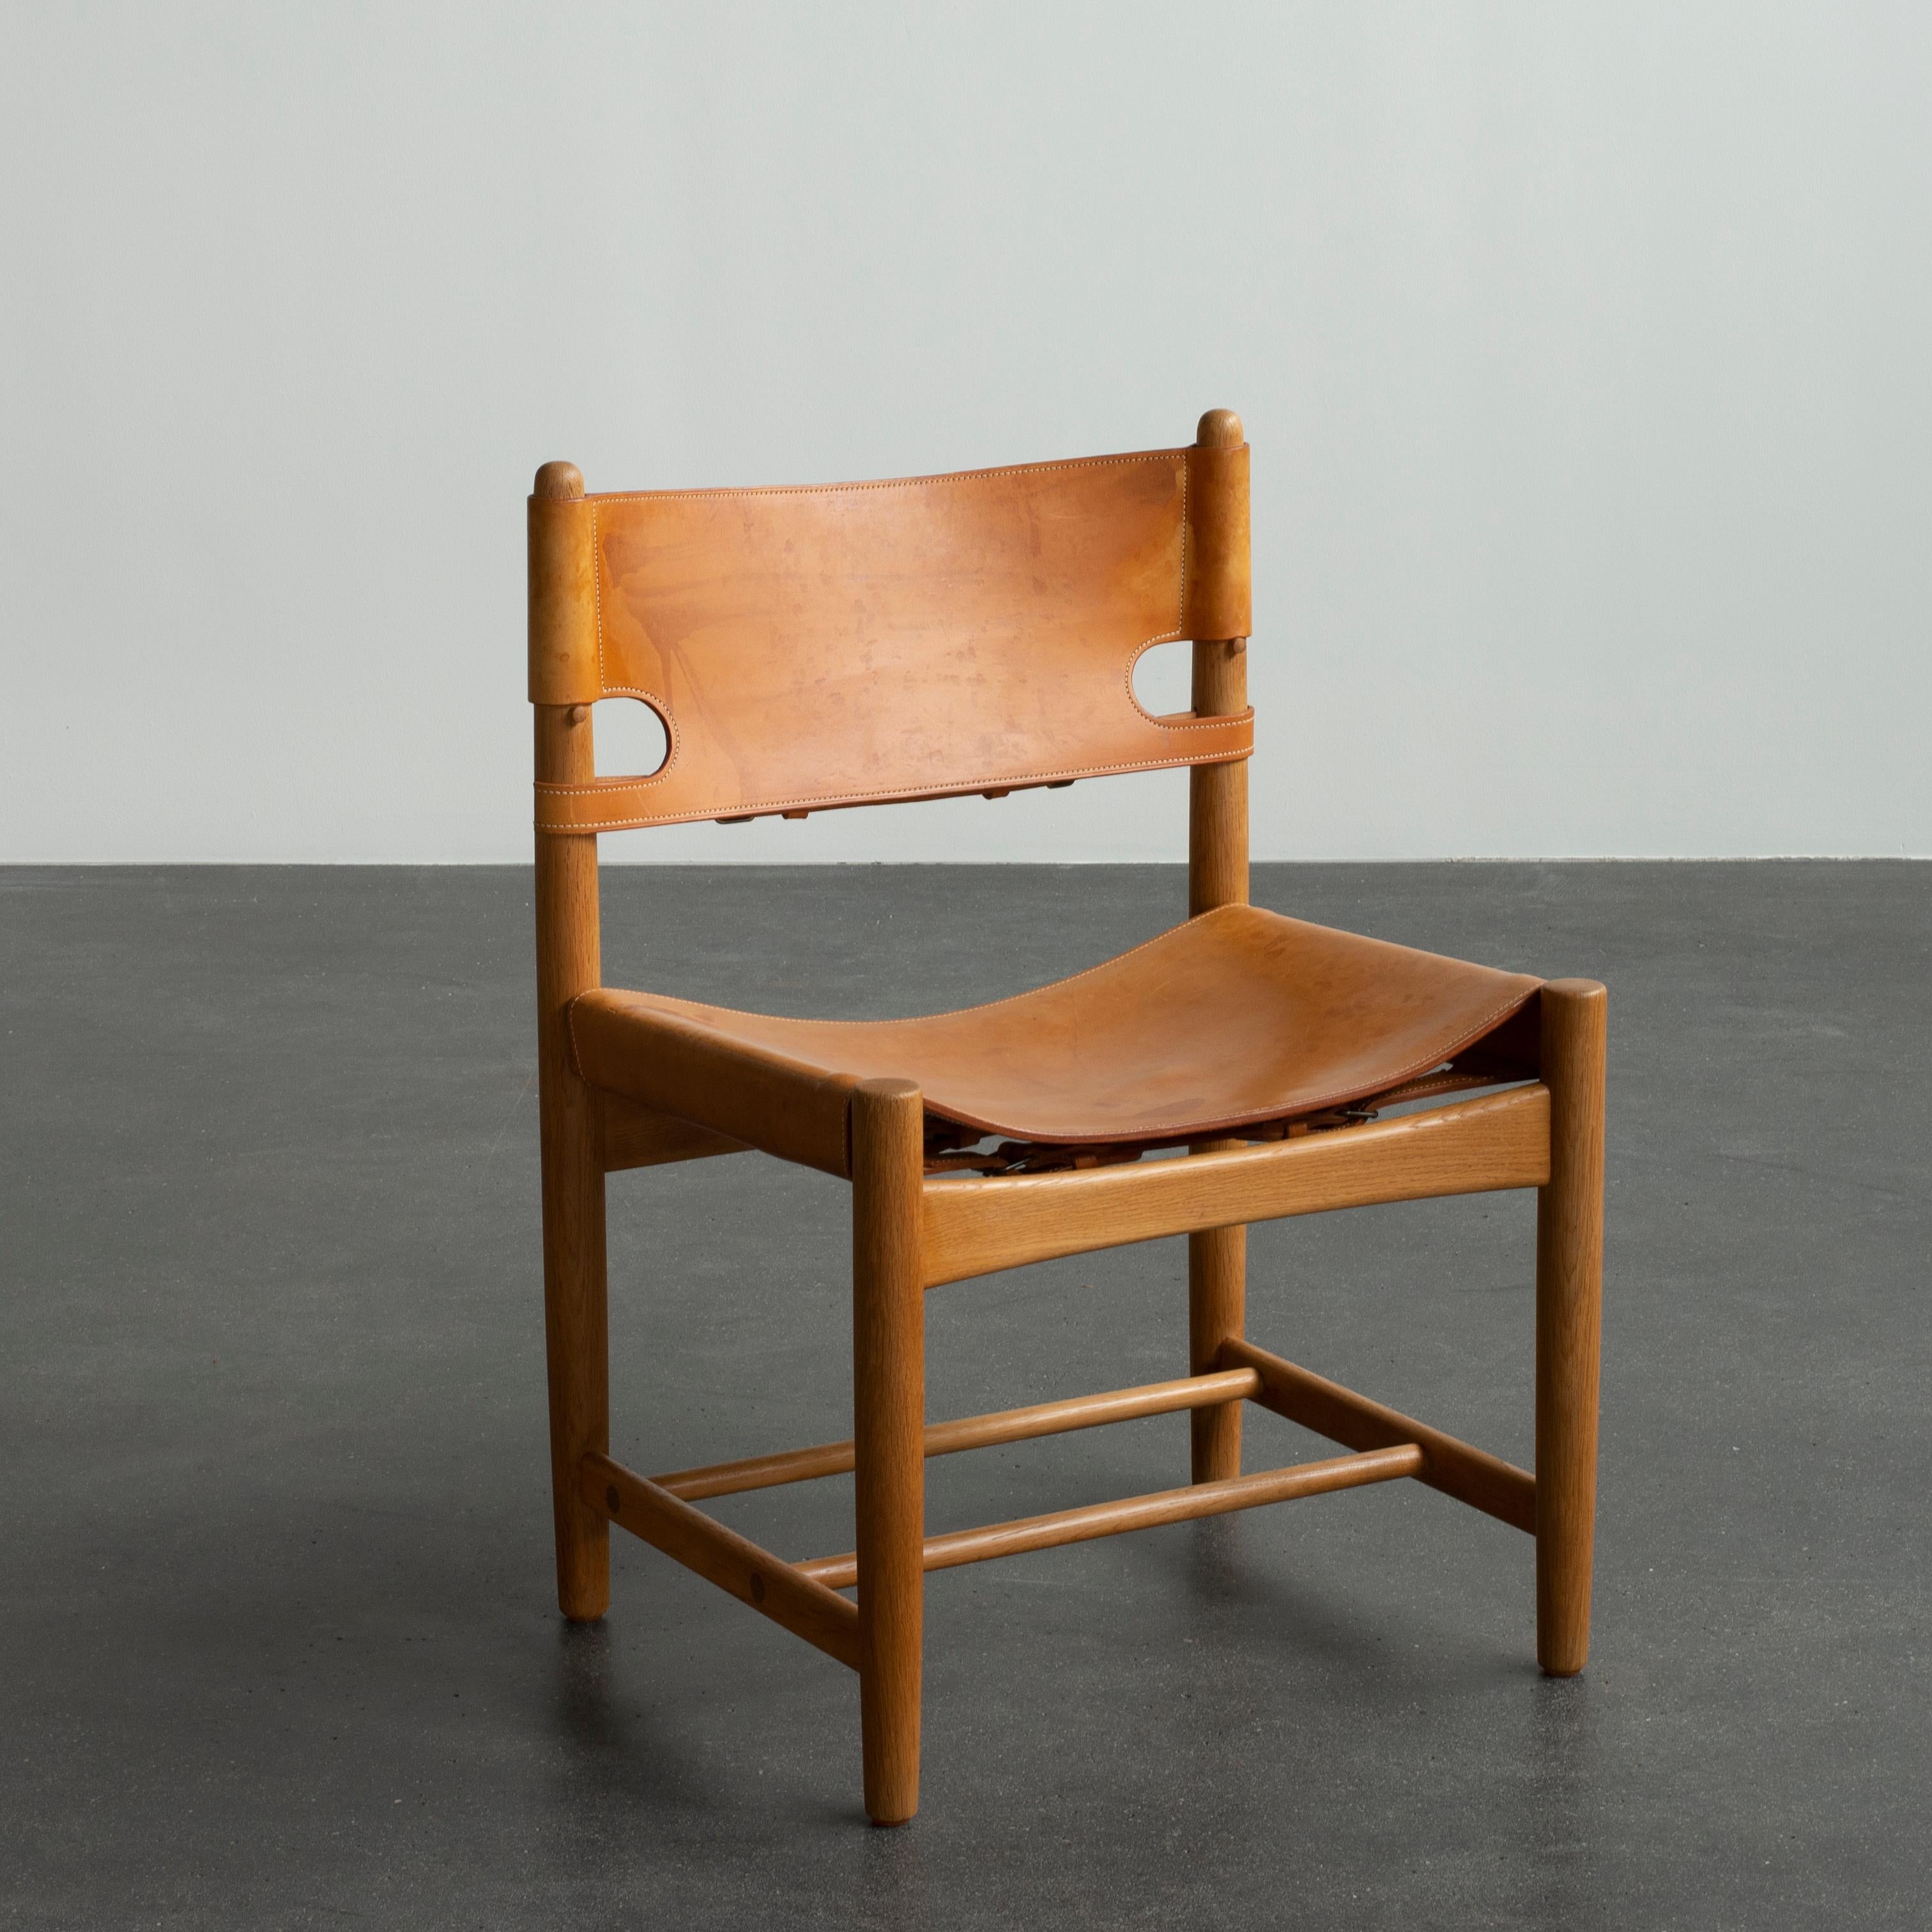 Børge Mogensen chair in oak and natural tanned leather. Executed by Fredericia Furniture.